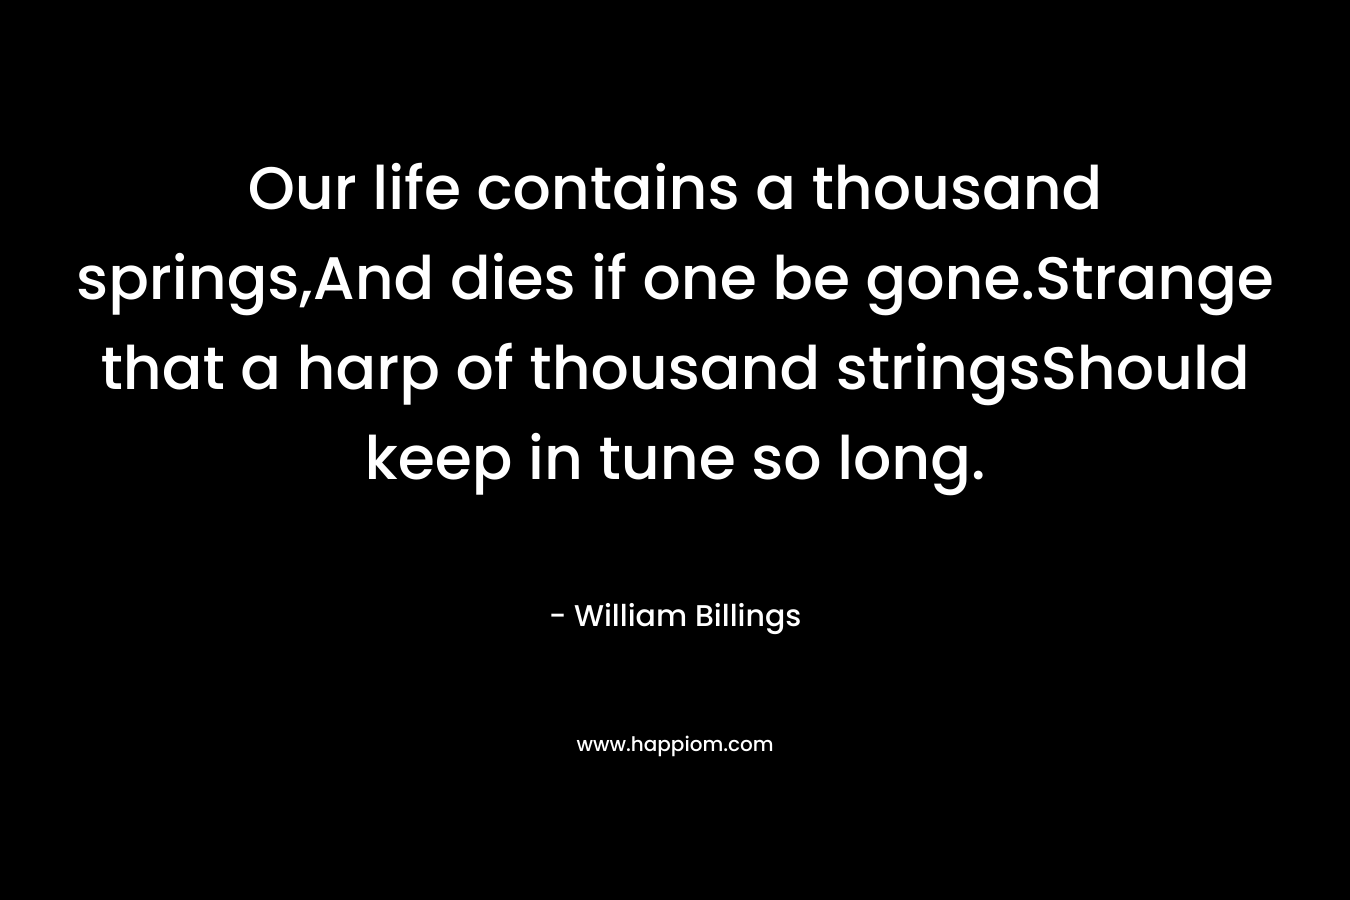 Our life contains a thousand springs,And dies if one be gone.Strange that a harp of thousand stringsShould keep in tune so long.